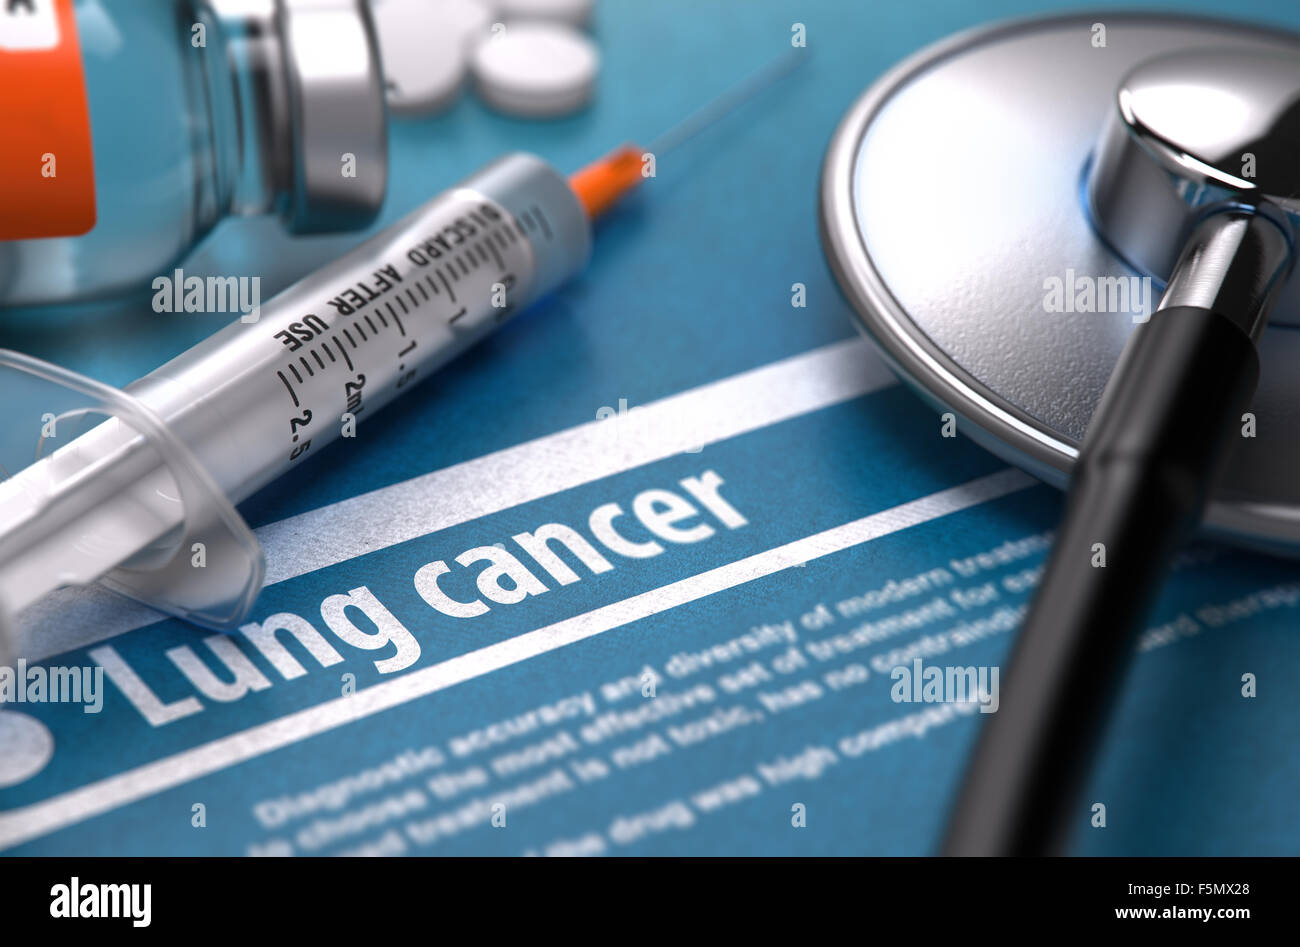 Lung Cancer. Medical Concept on Blue Background. Stock Photo